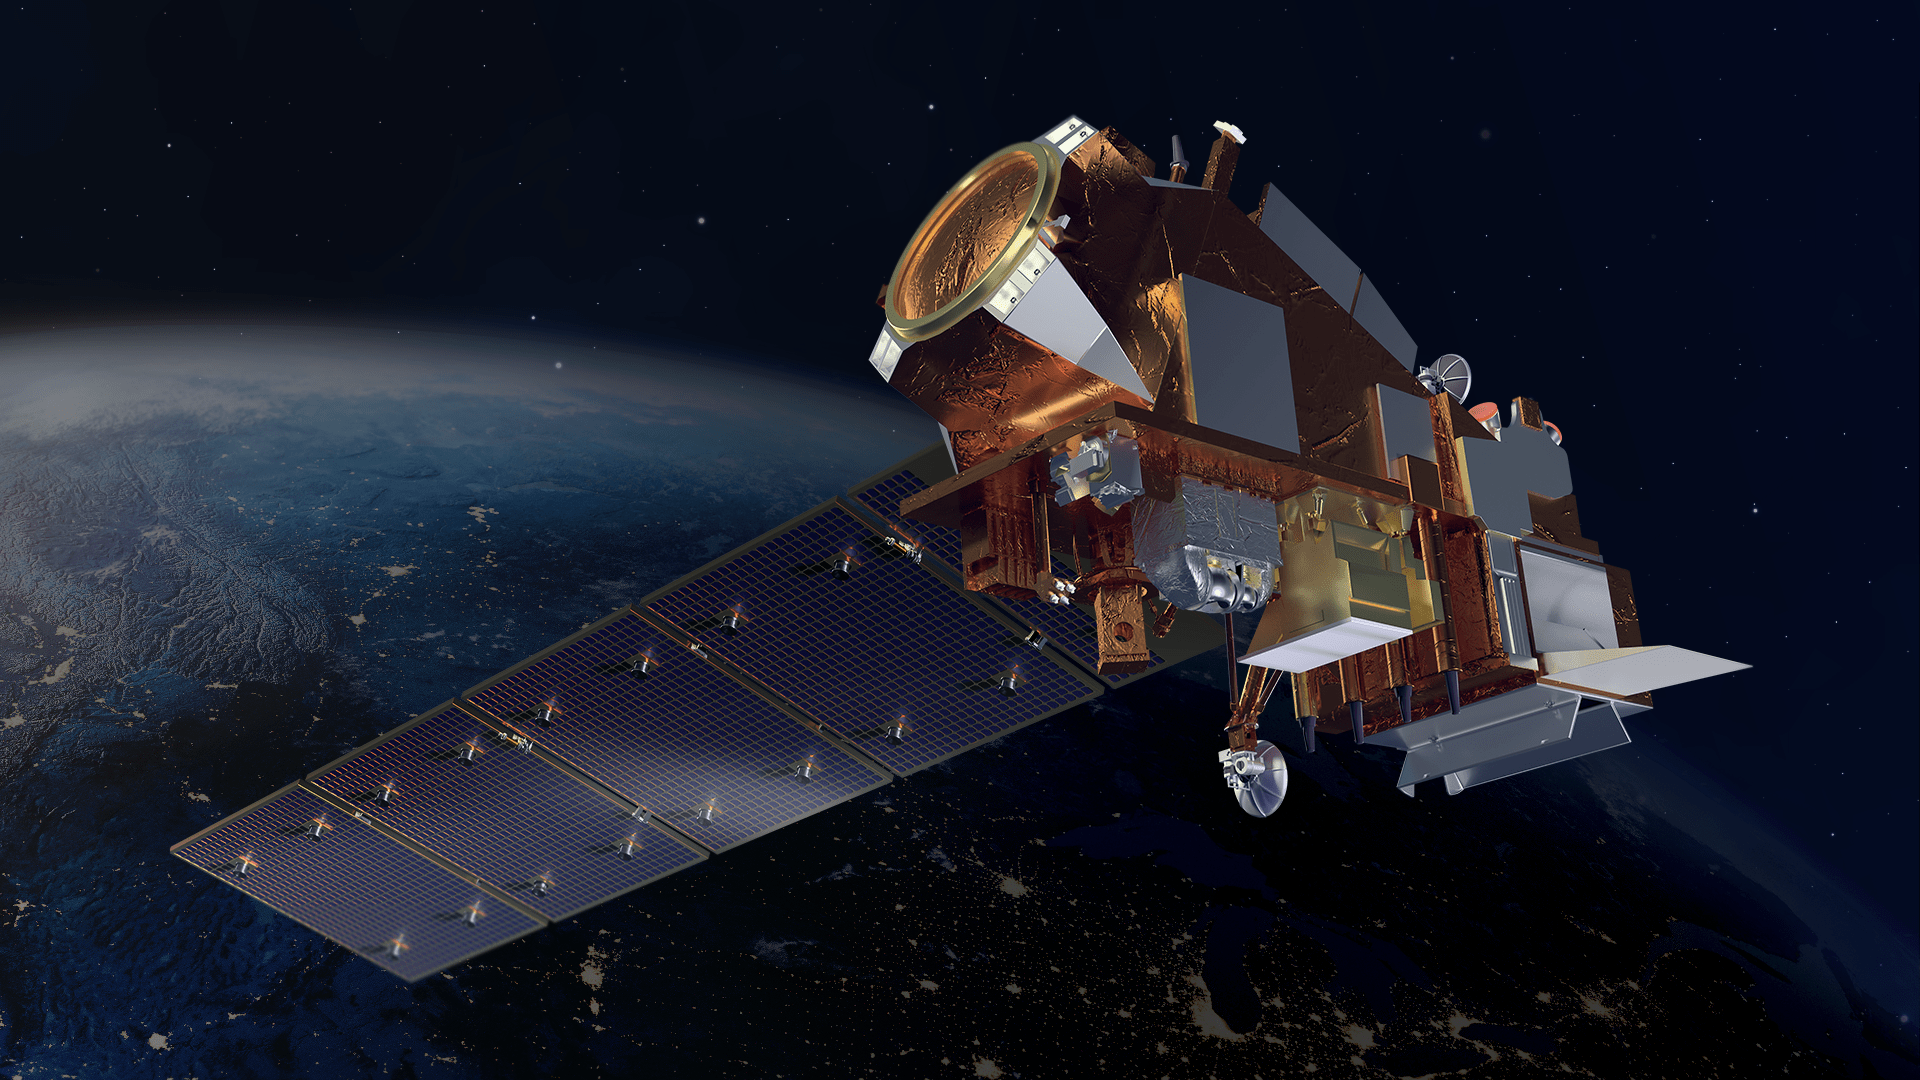 Artist illustration of a gold-colored satellite against a dark atmosphere